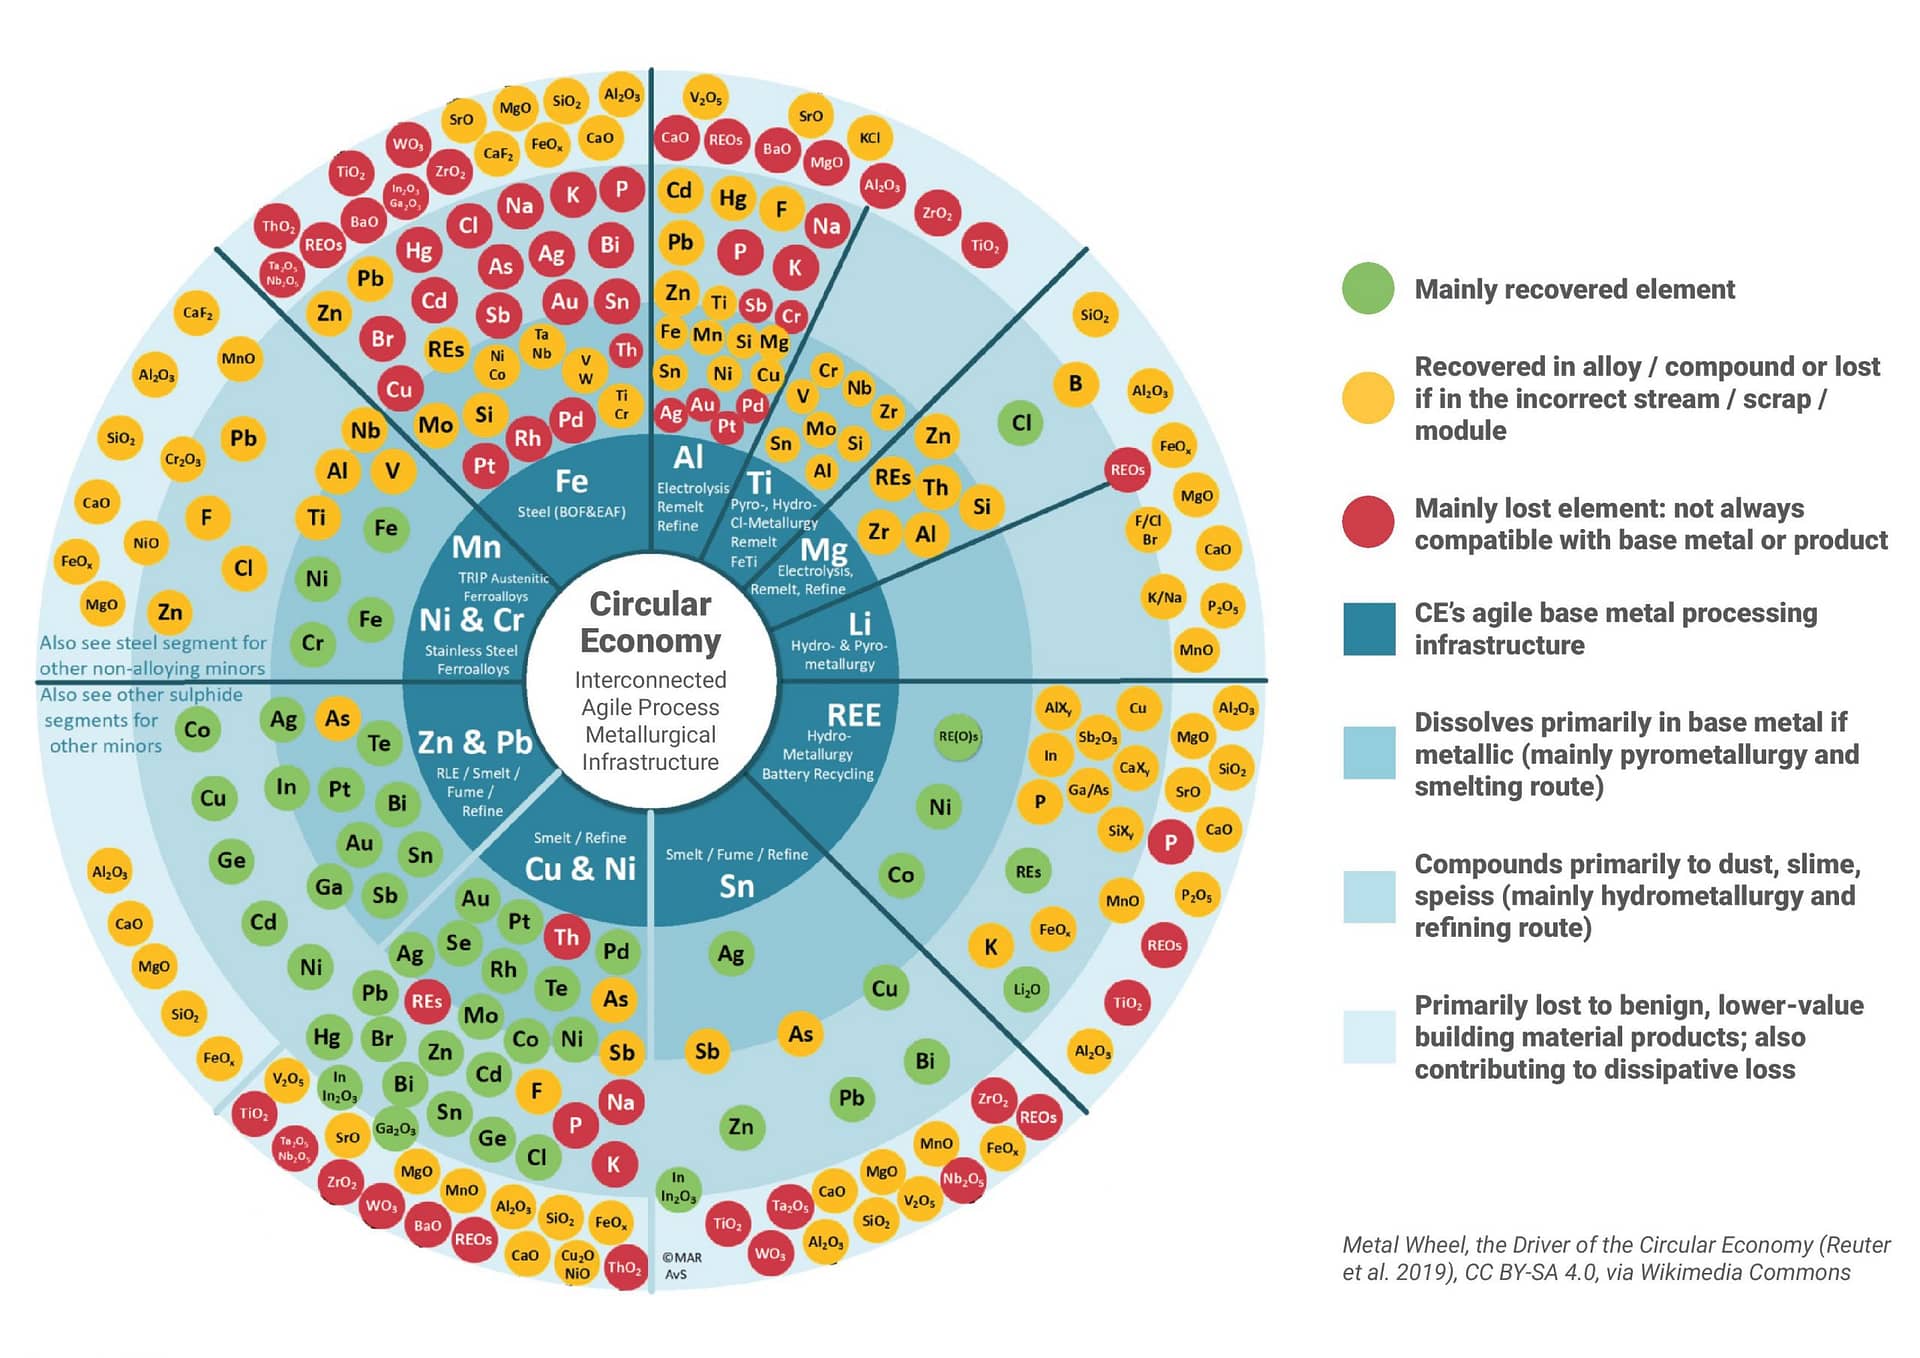 The Metal Wheel, Driver of the Circular Economy (Reuter et al. 2019). This diagram highlights the different methods for recovering metals from waste electronic materials, including the materials that are typically lost in each process. Every section of the metal wheel is crucial for a properly functioning circular economy.